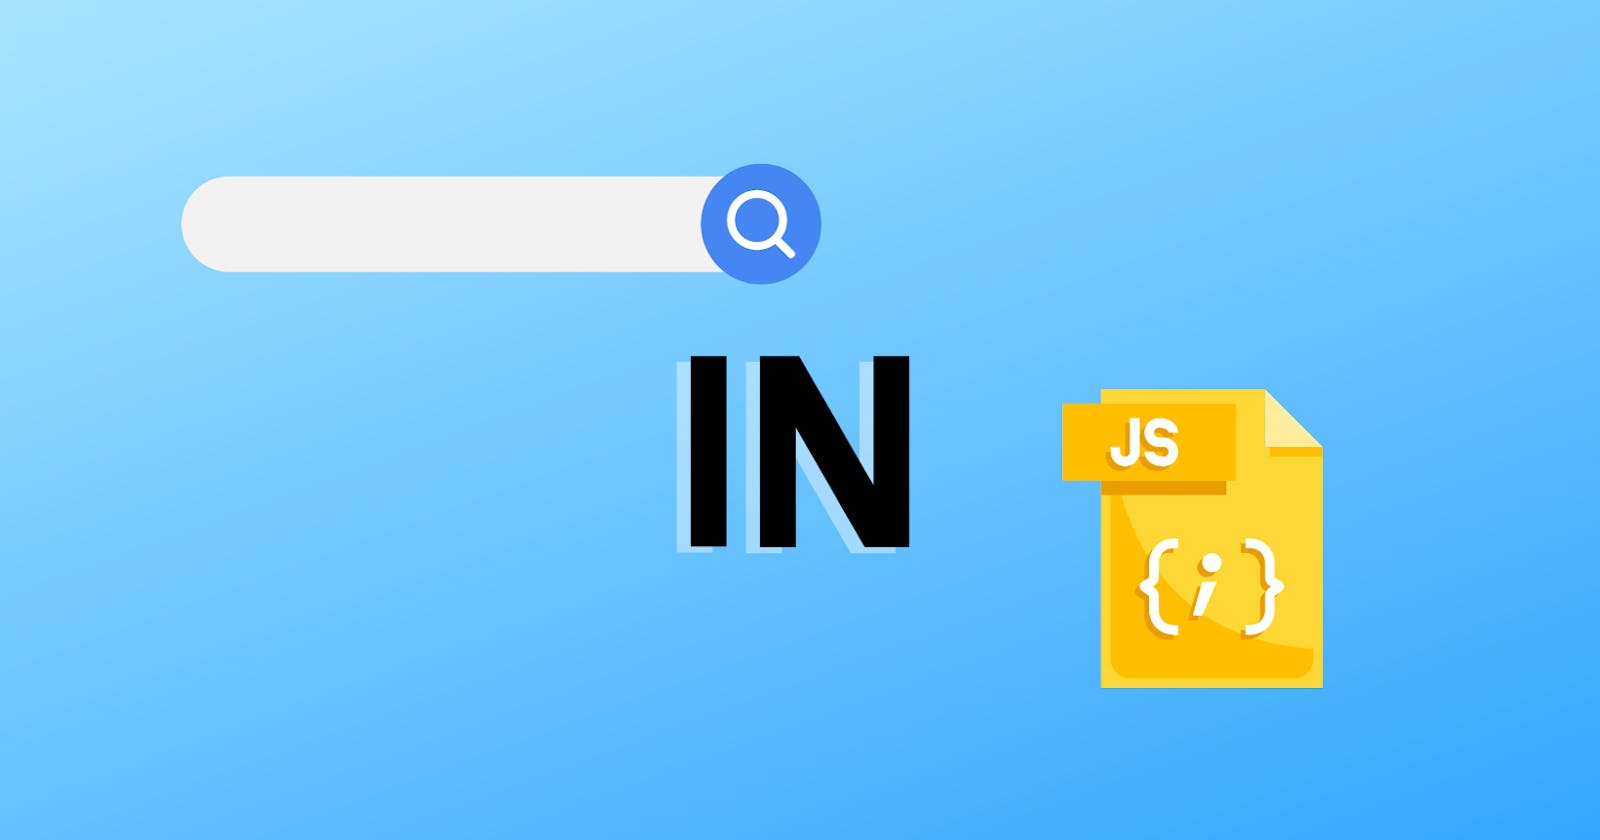 Building a Search Bar in JavaScript